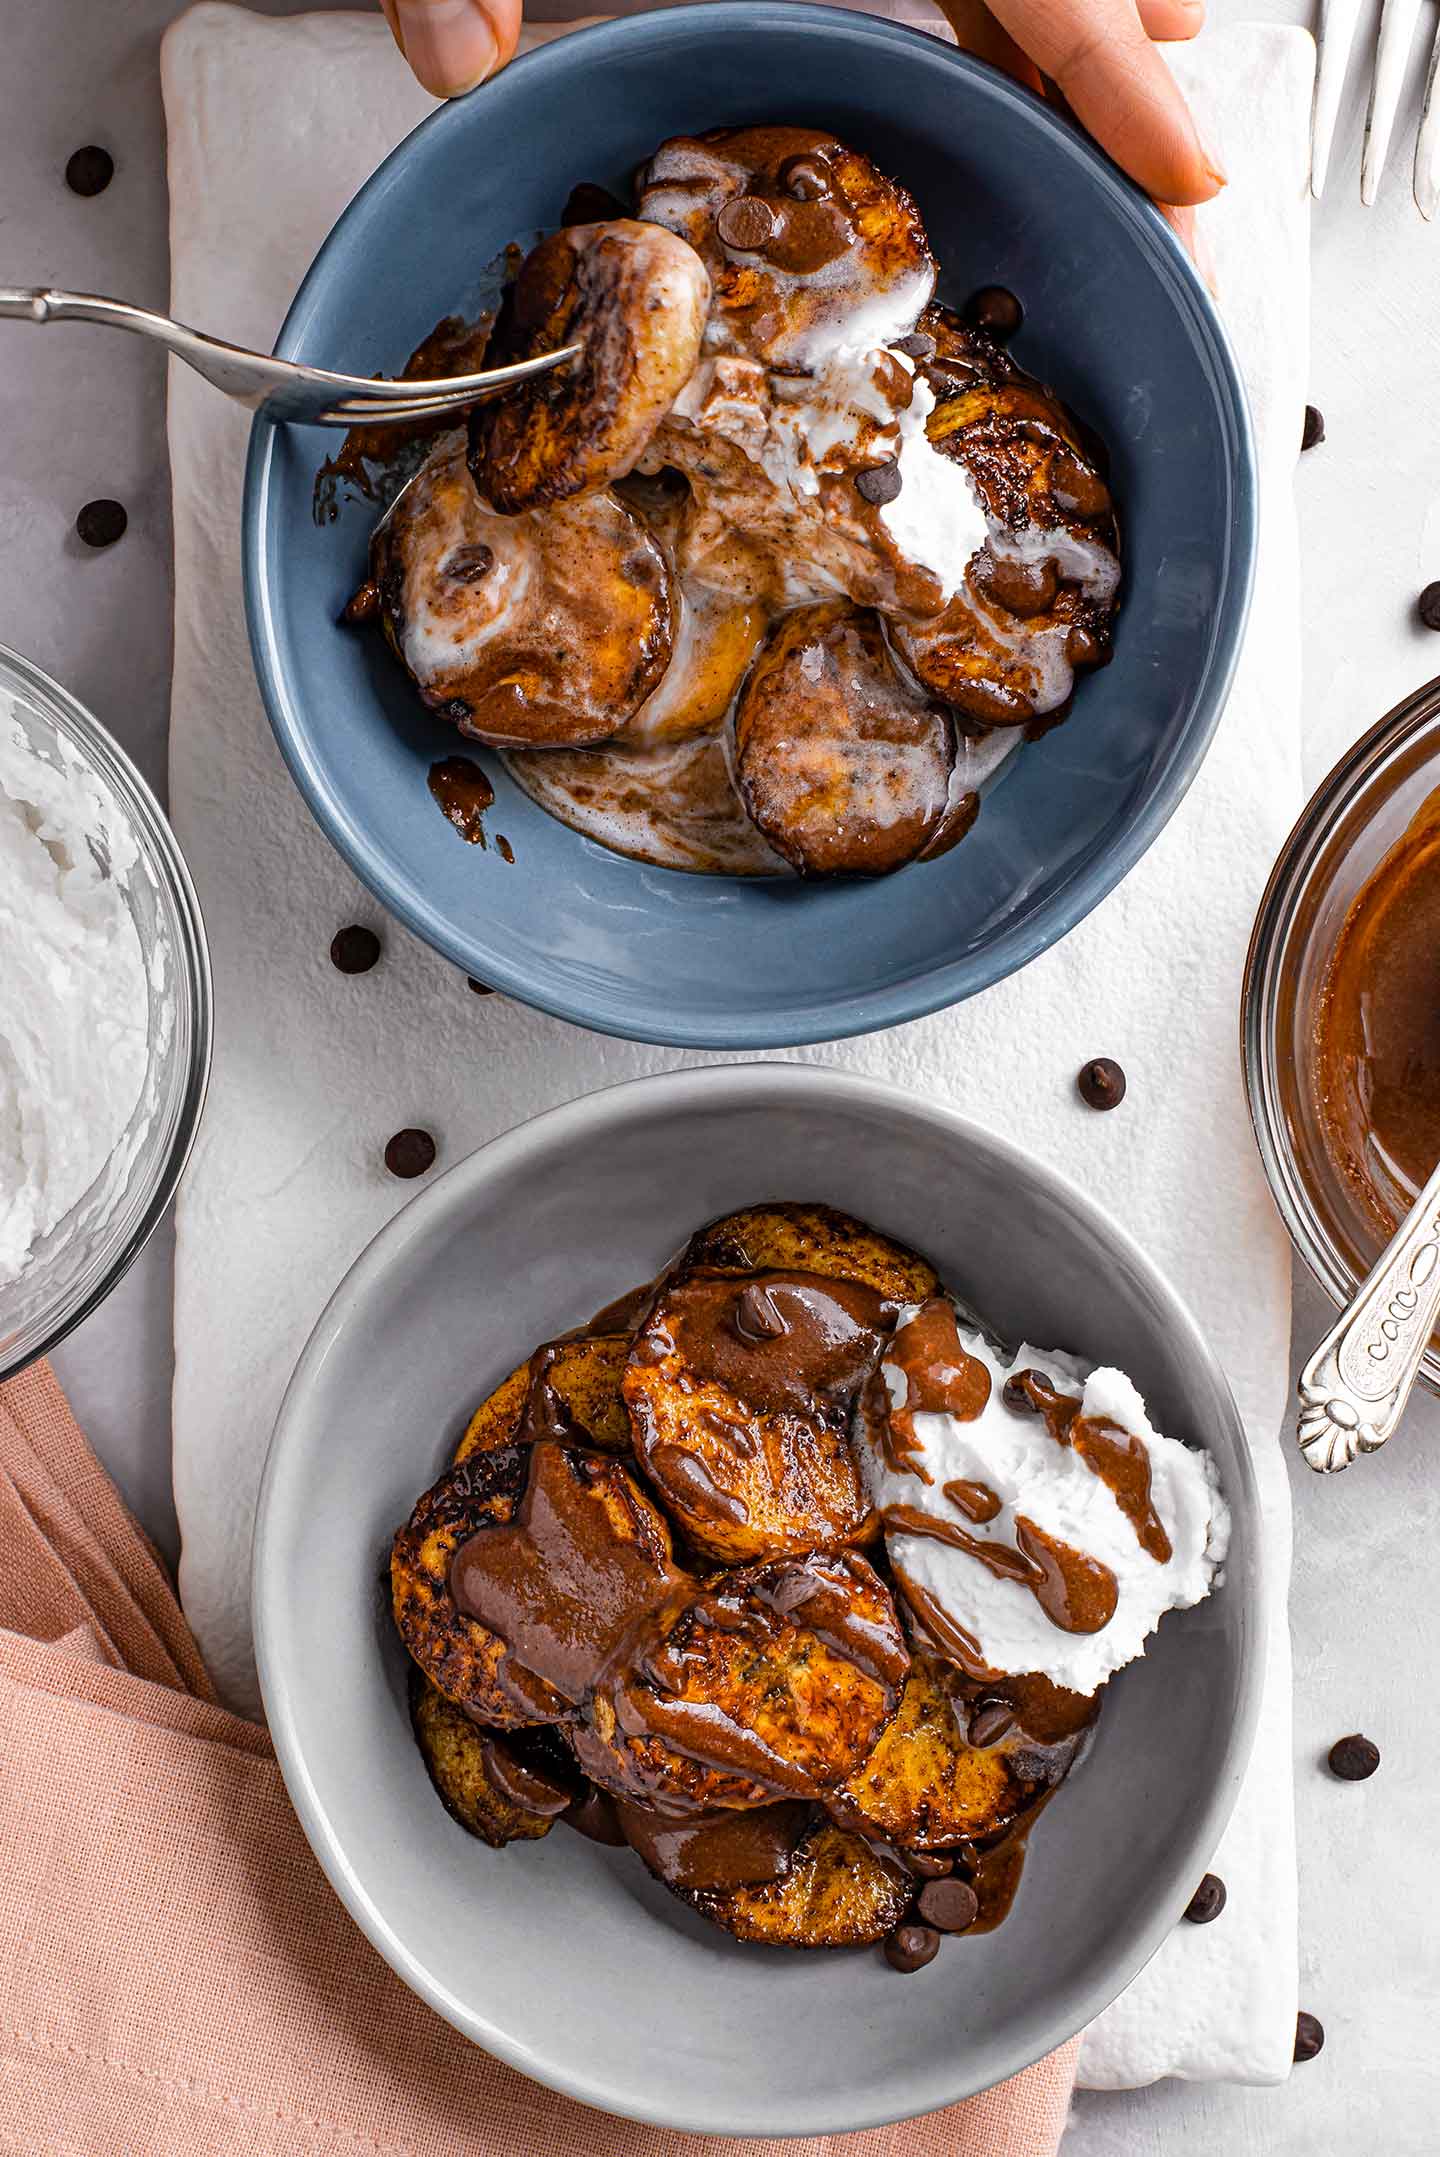 Top down view of two bowls of warm caramelized plantains. A hand uses a fork to pick up a slice from one bowl. The warm plantains have melted whipped cream and mix with chocolate syrup.